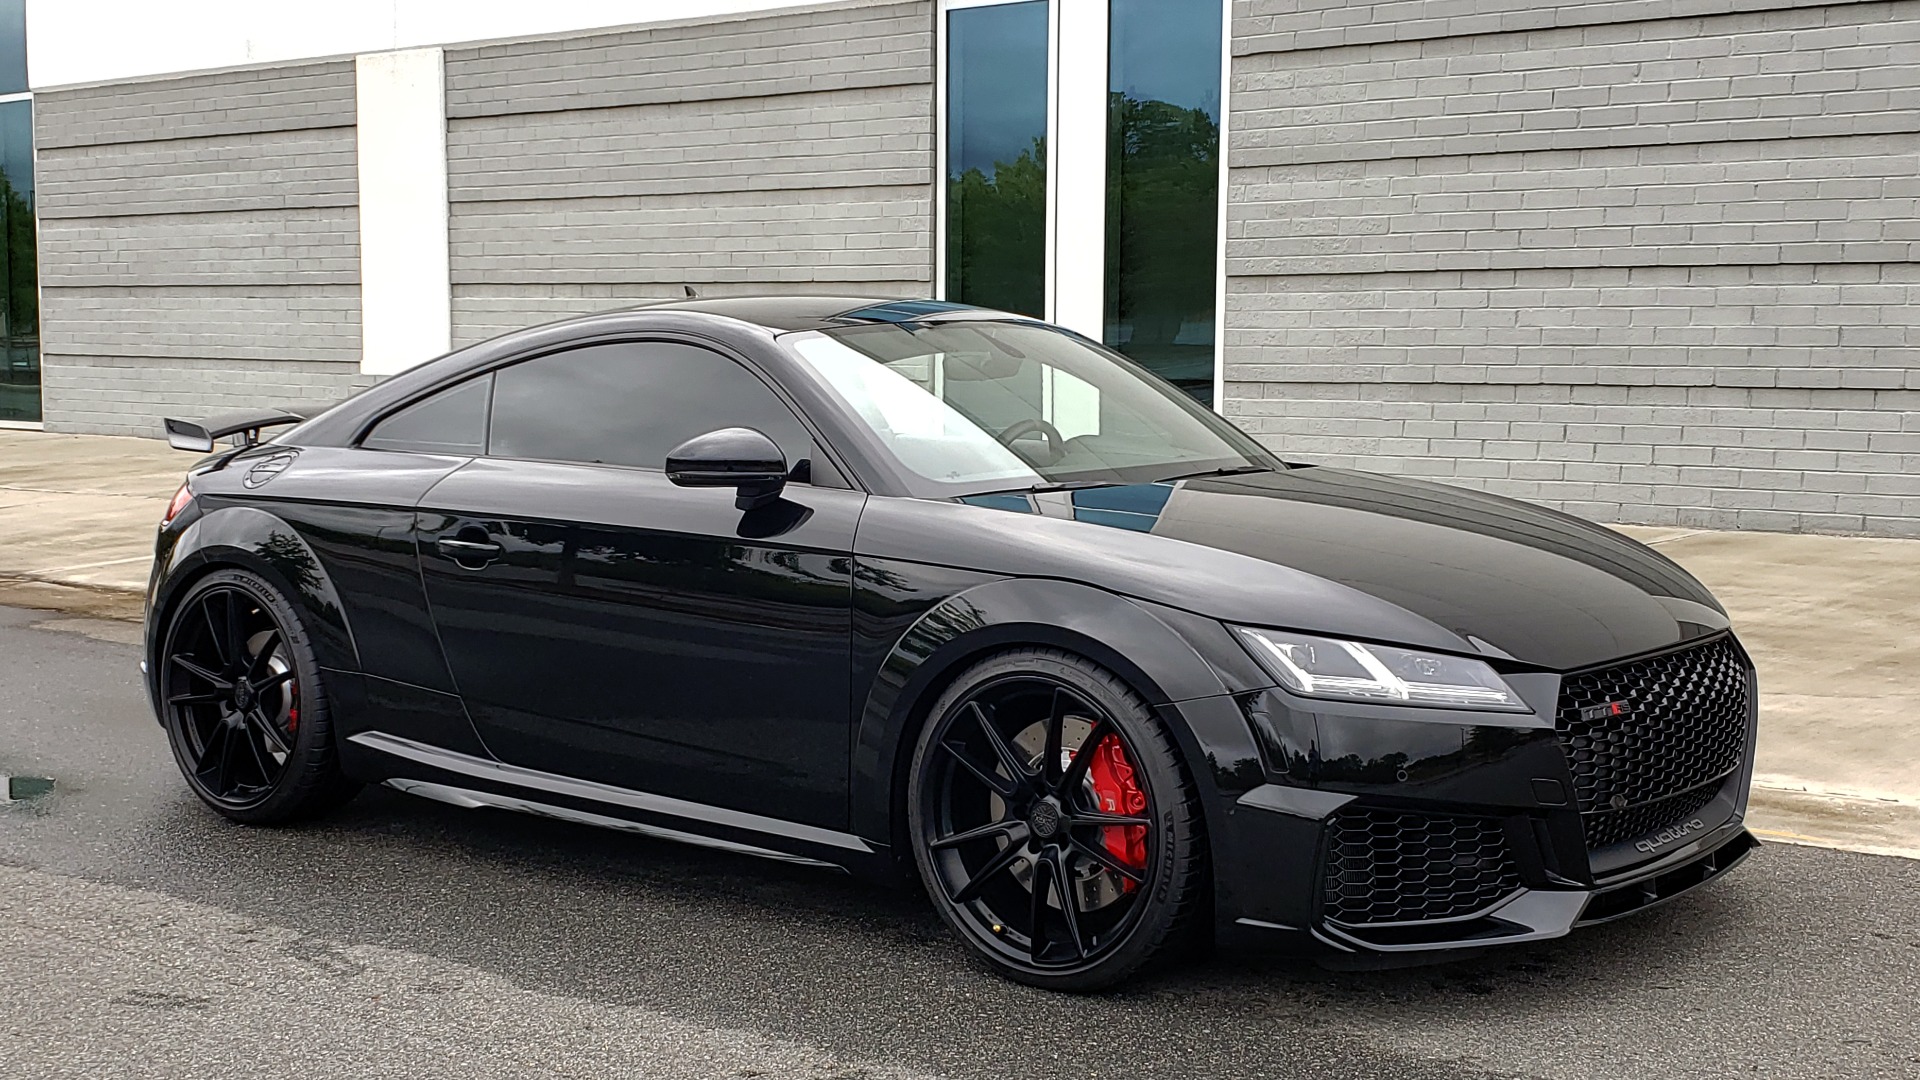 Used 2019 Audi TT RS 2.5L / QUATTRO / RS DESIGN / TECH / DYNAMIC / BLACK OPTIC / CARB for sale Sold at Formula Imports in Charlotte NC 28227 8